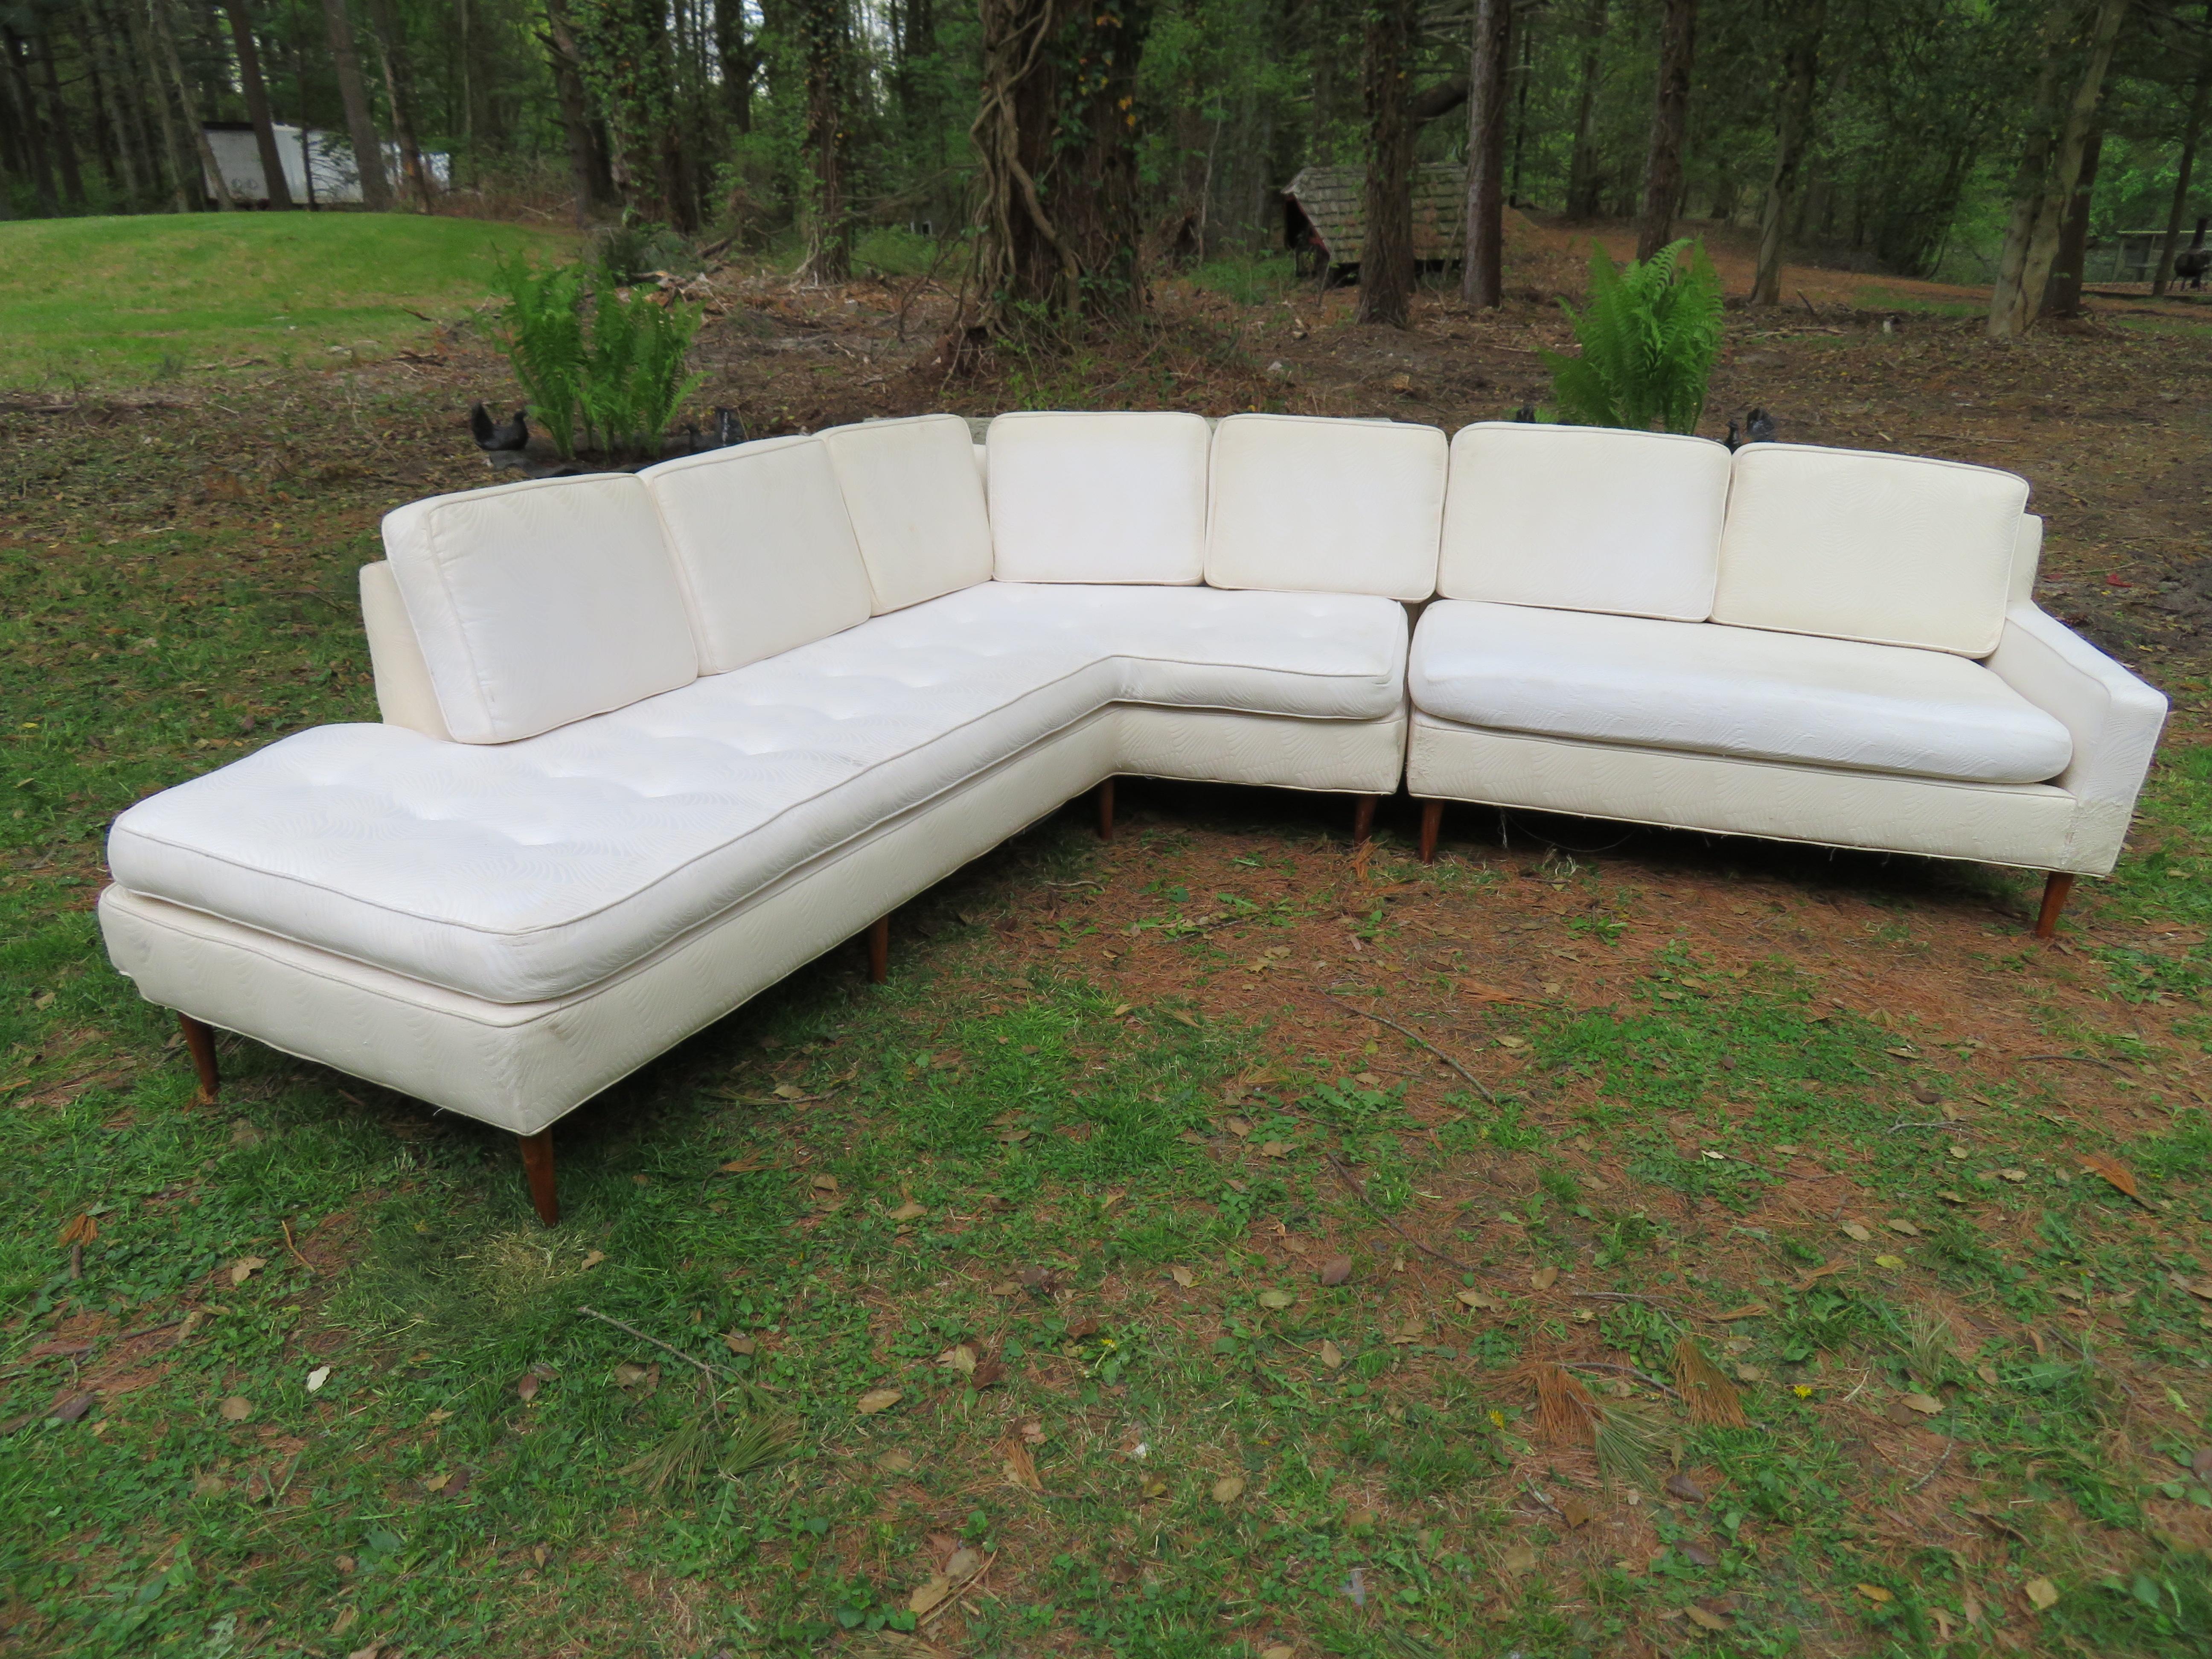 Handsome Harvey Probber 2-piece Nuclear Sert sectional sofa. This piece will definitely need to be reupholstered but all those wonderful Probber bones are in good condition. This sofa measures from front left corner to back right corner 146